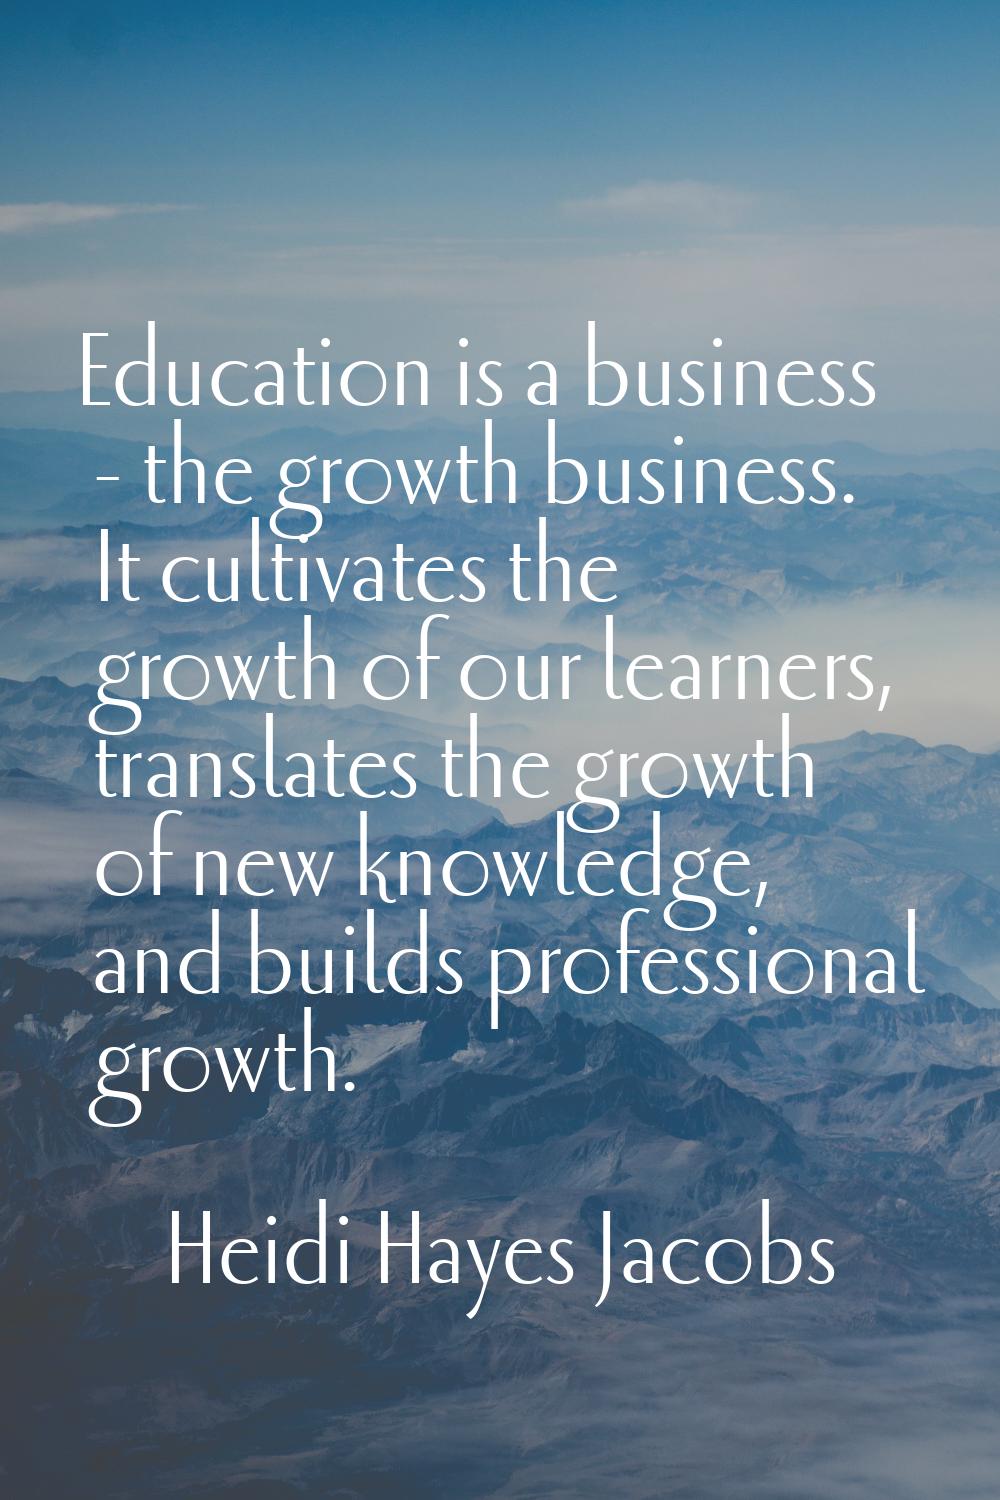 Education is a business - the growth business. It cultivates the growth of our learners, translates